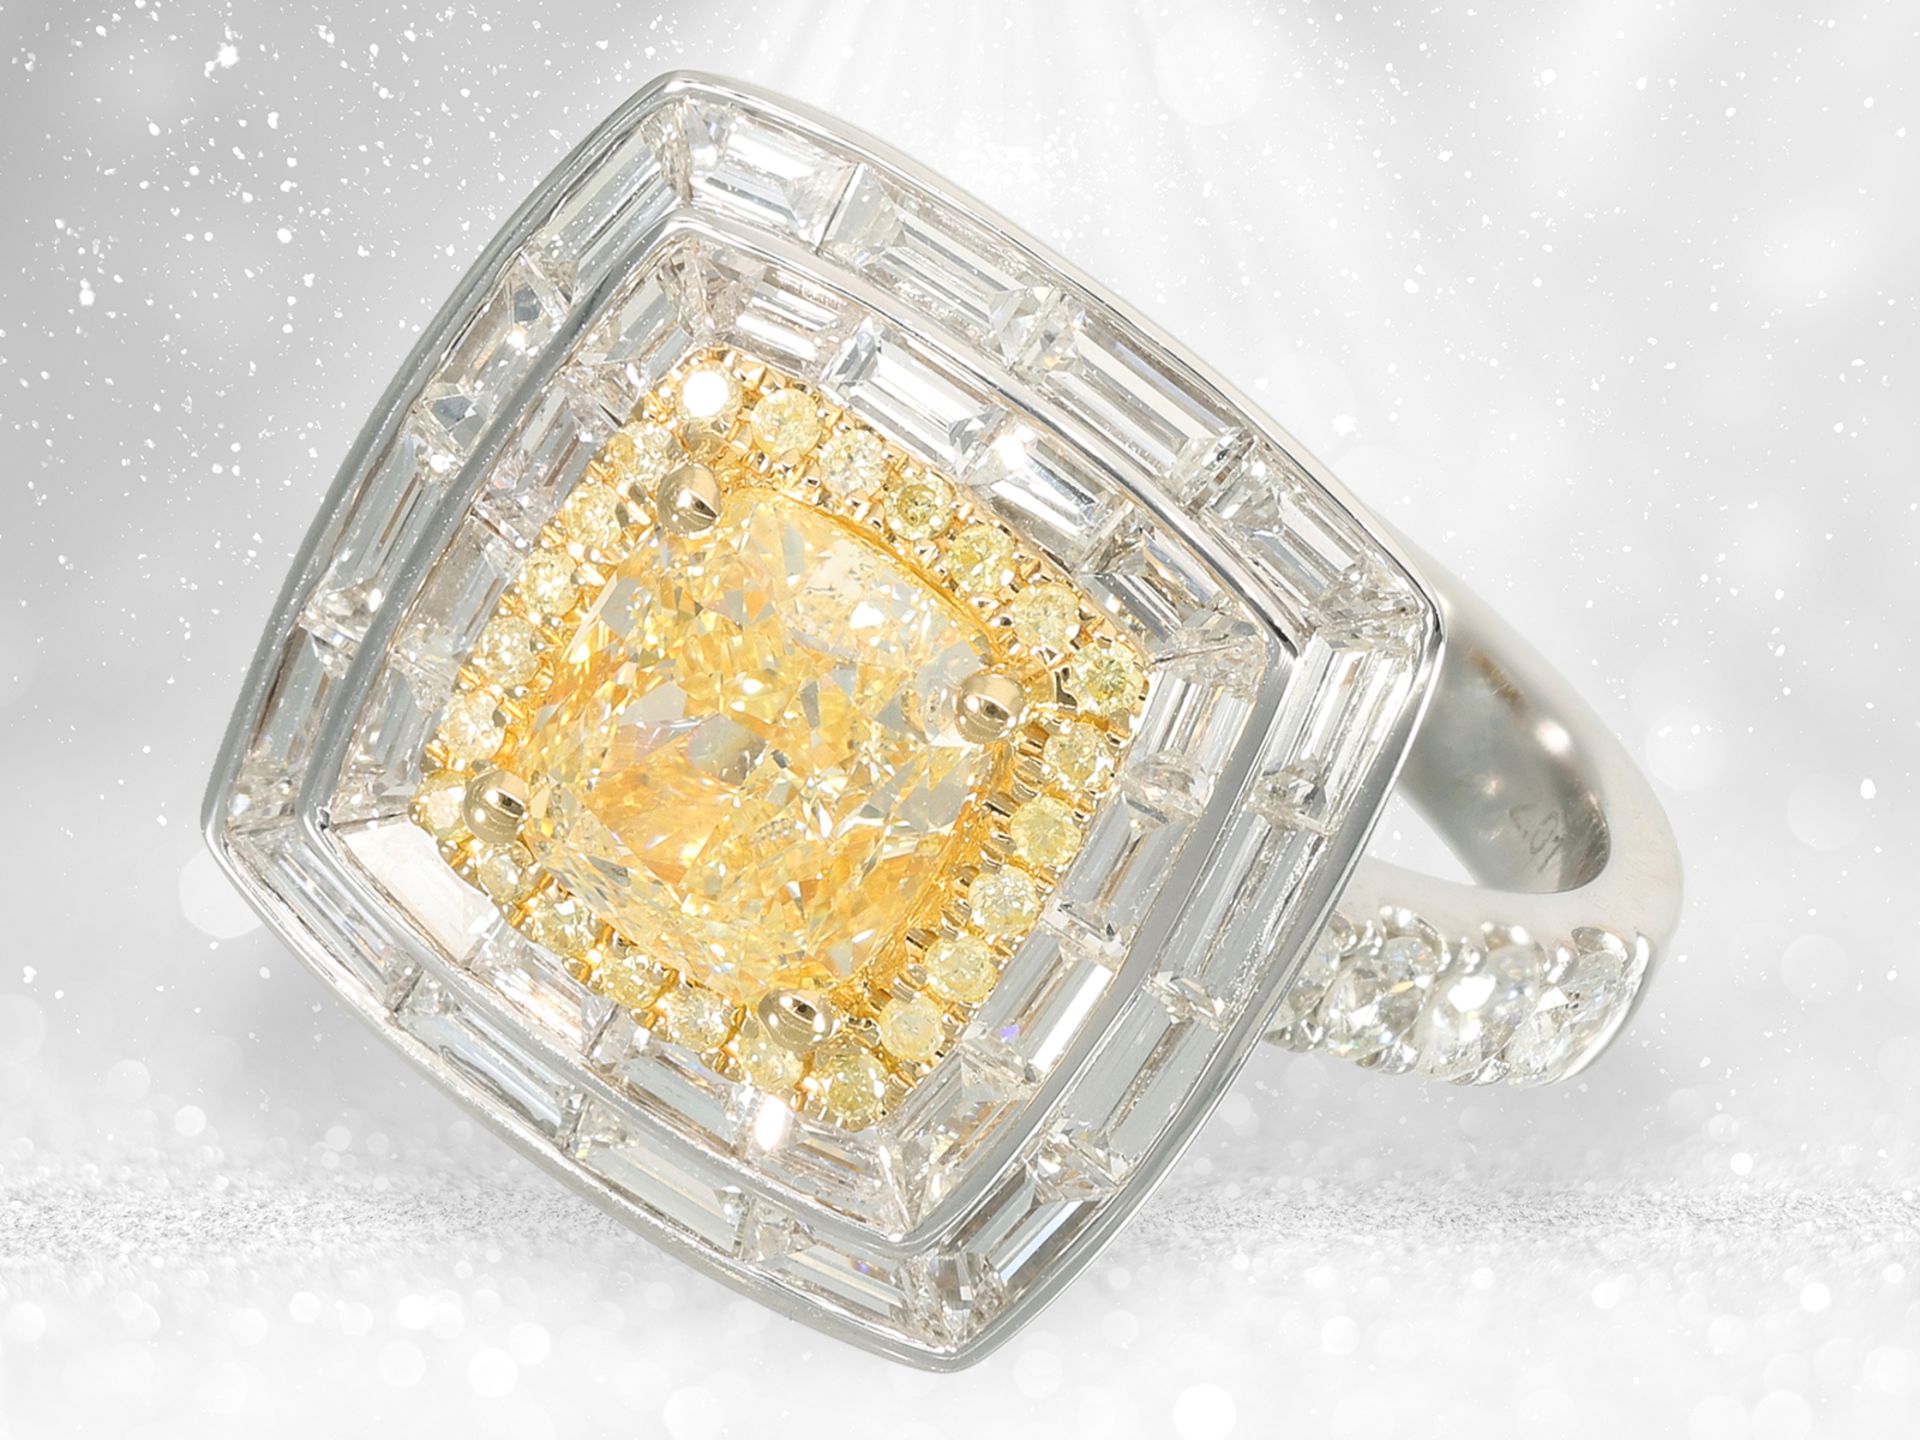 Ring: extremely elaborately crafted diamond ring, centre stone "Yellow Cushion" of 2ct